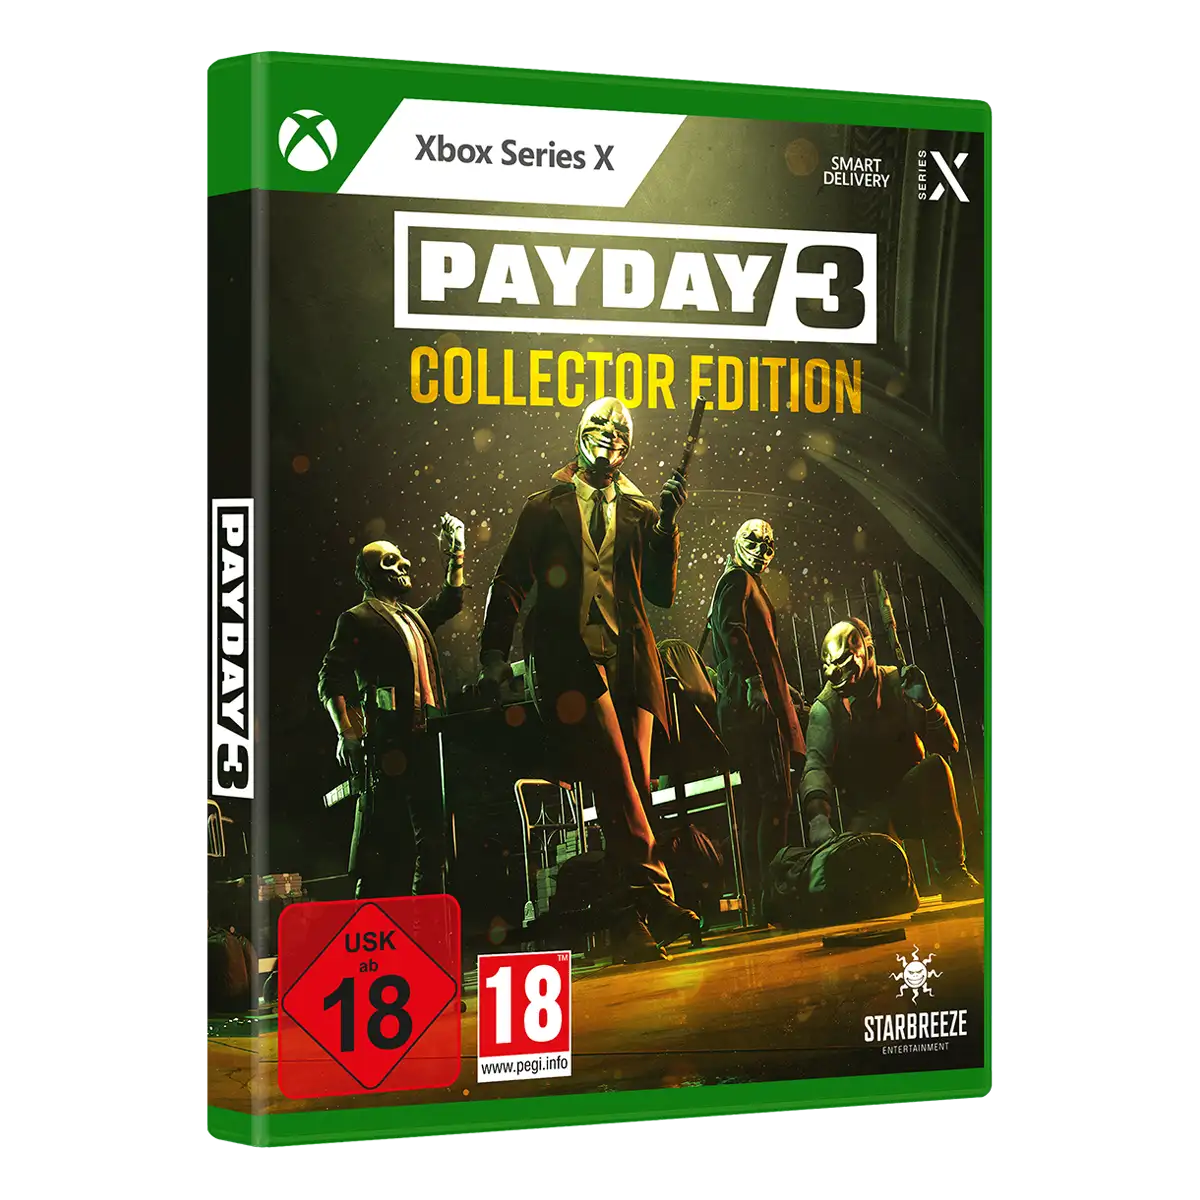 PAYDAY 3 Collector's Edition (Xbox Series X) Image 2